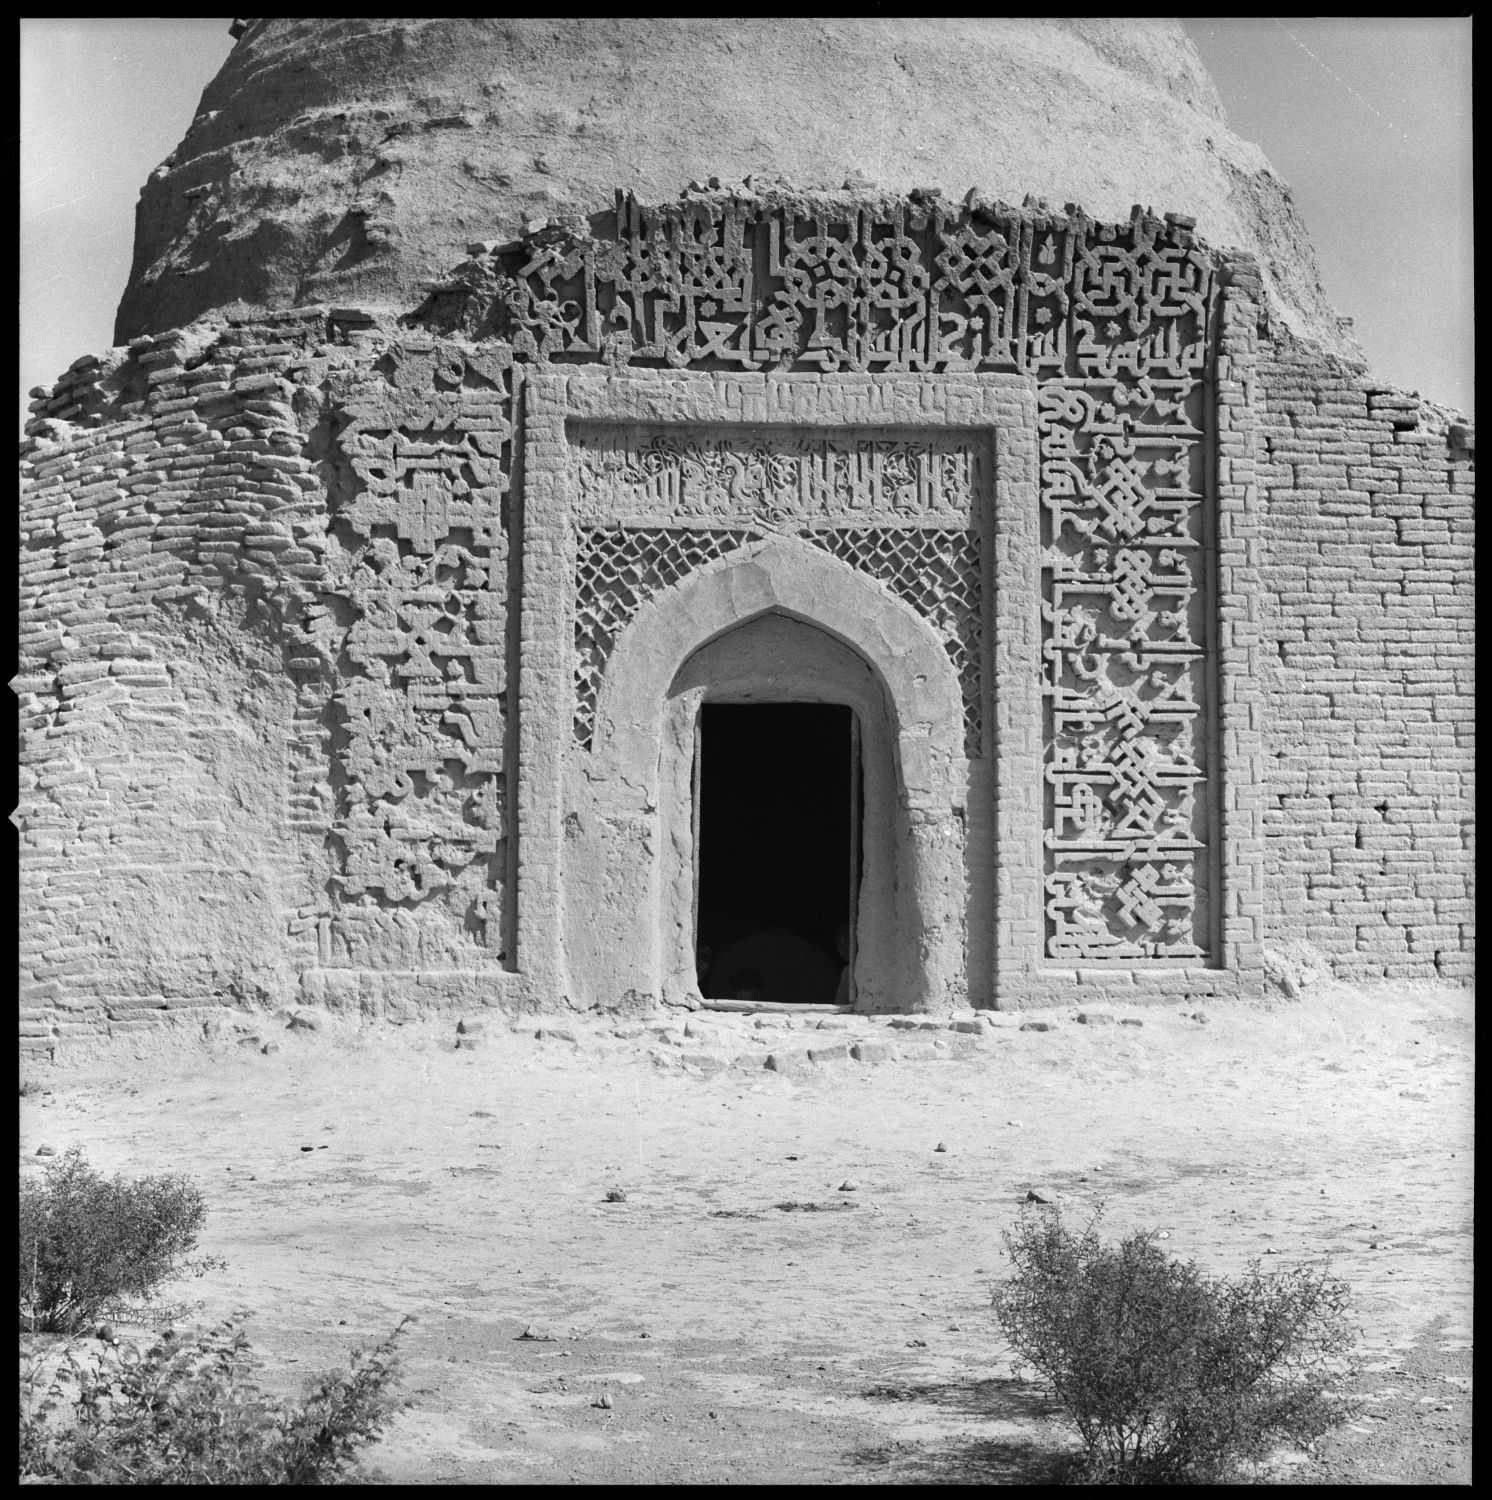 Exterior view from south showing arched doorway with Kufic inscription above.